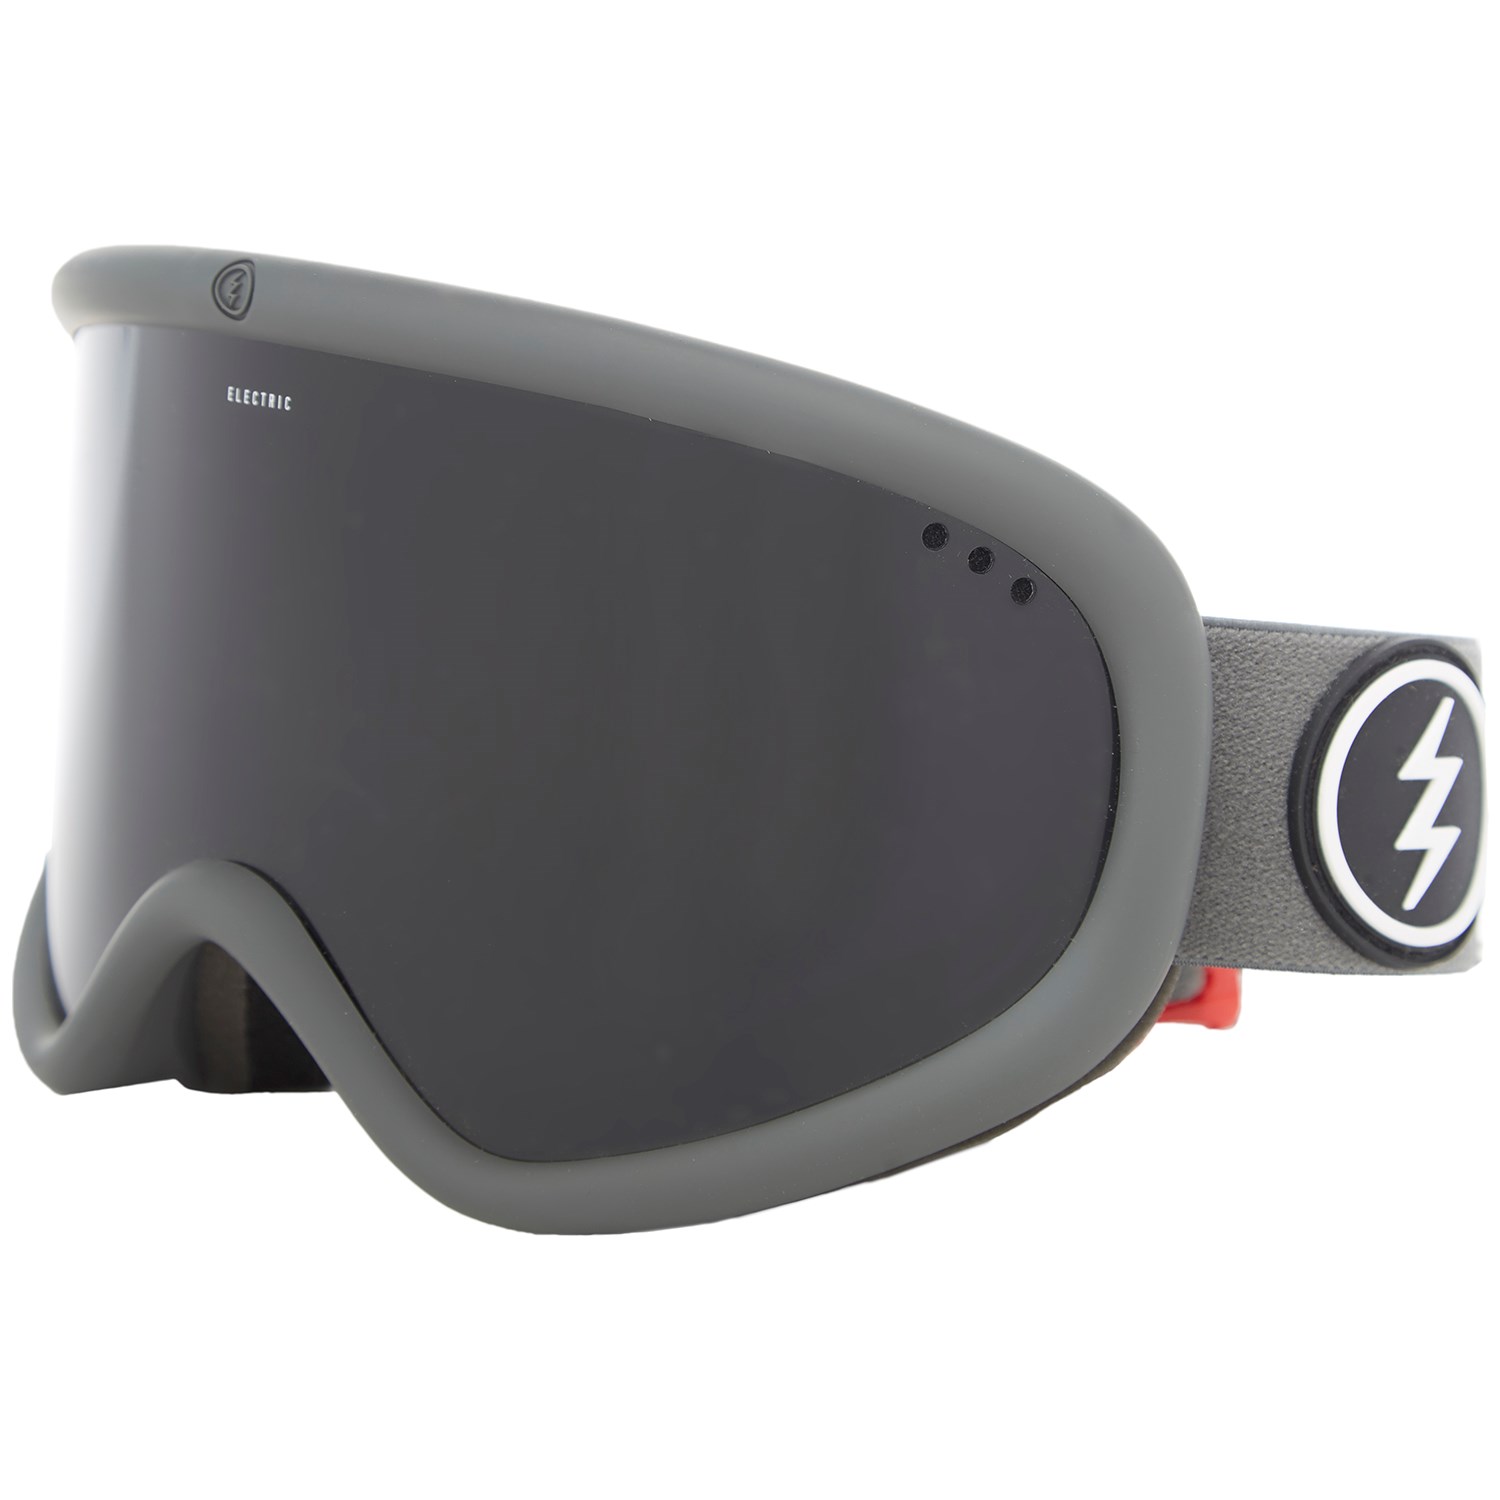 Electric Charger XL Goggles | evo